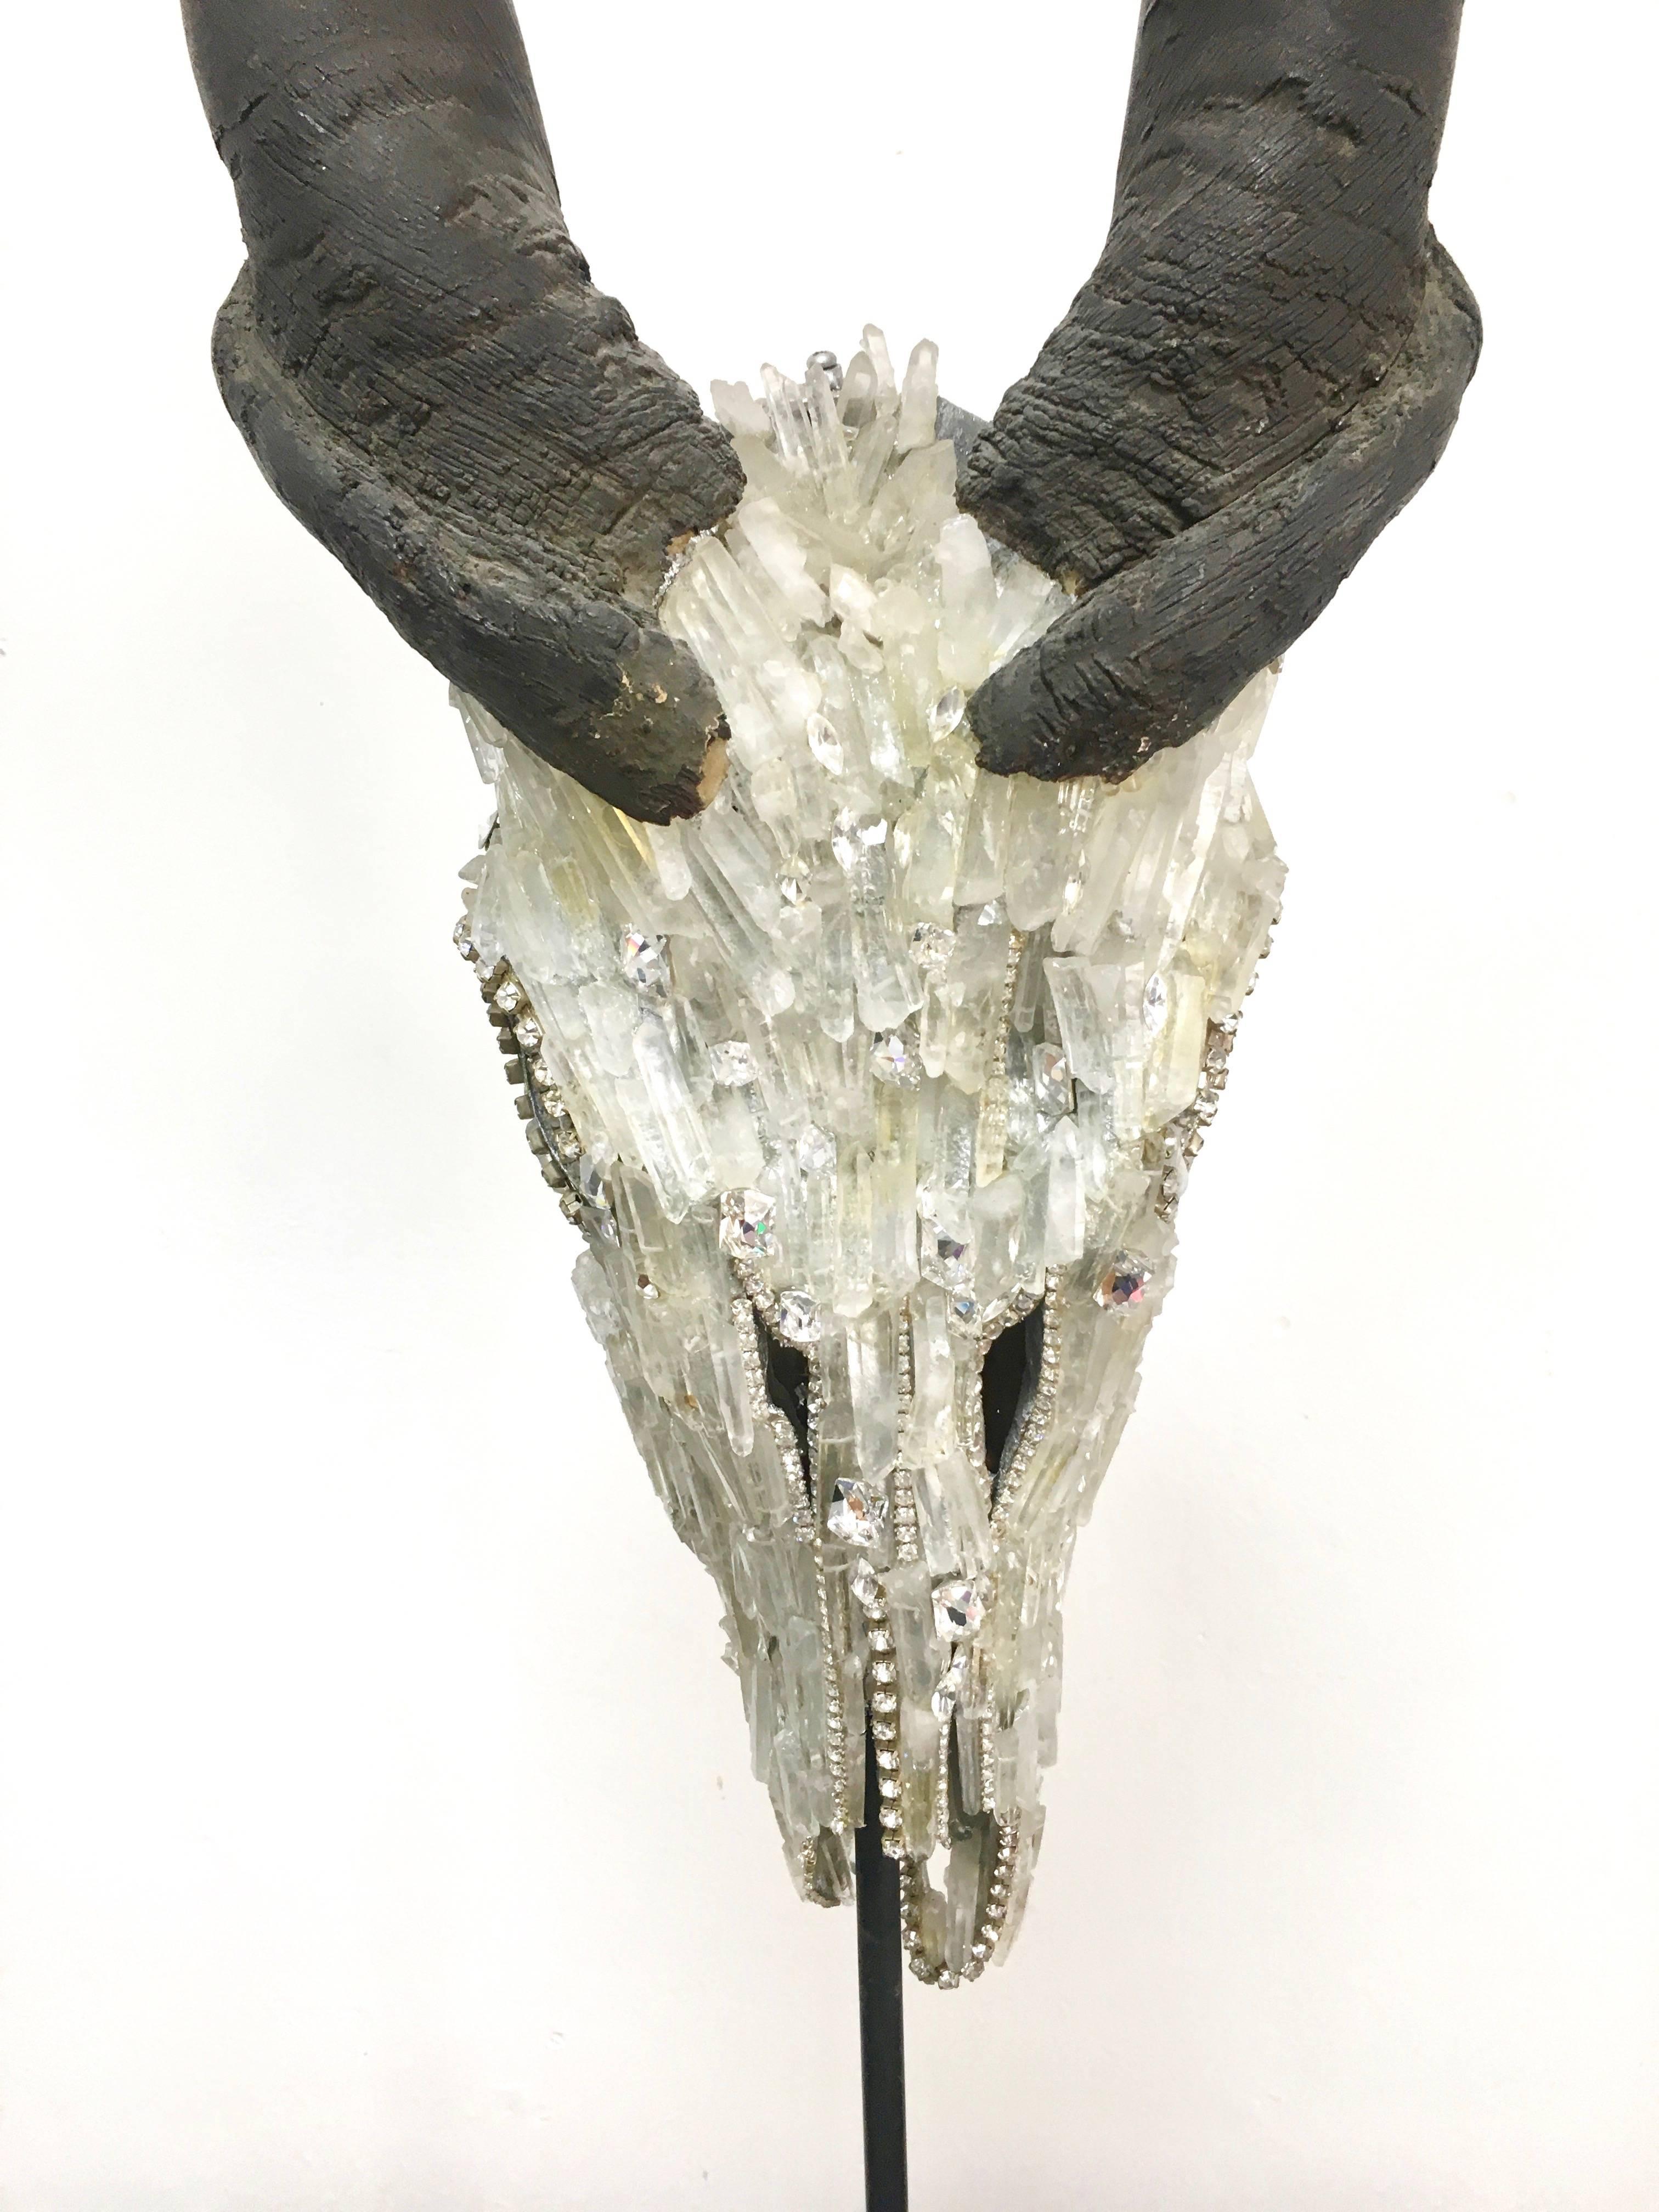 A very large Kudu skull with head encrusted in rock crystal points and Swarovski crystals, hand done work on a gallery stand.  In the Manner of Alexander McQueen.. 

The brilliance of the crystals is dazzling in person, especially when placed under